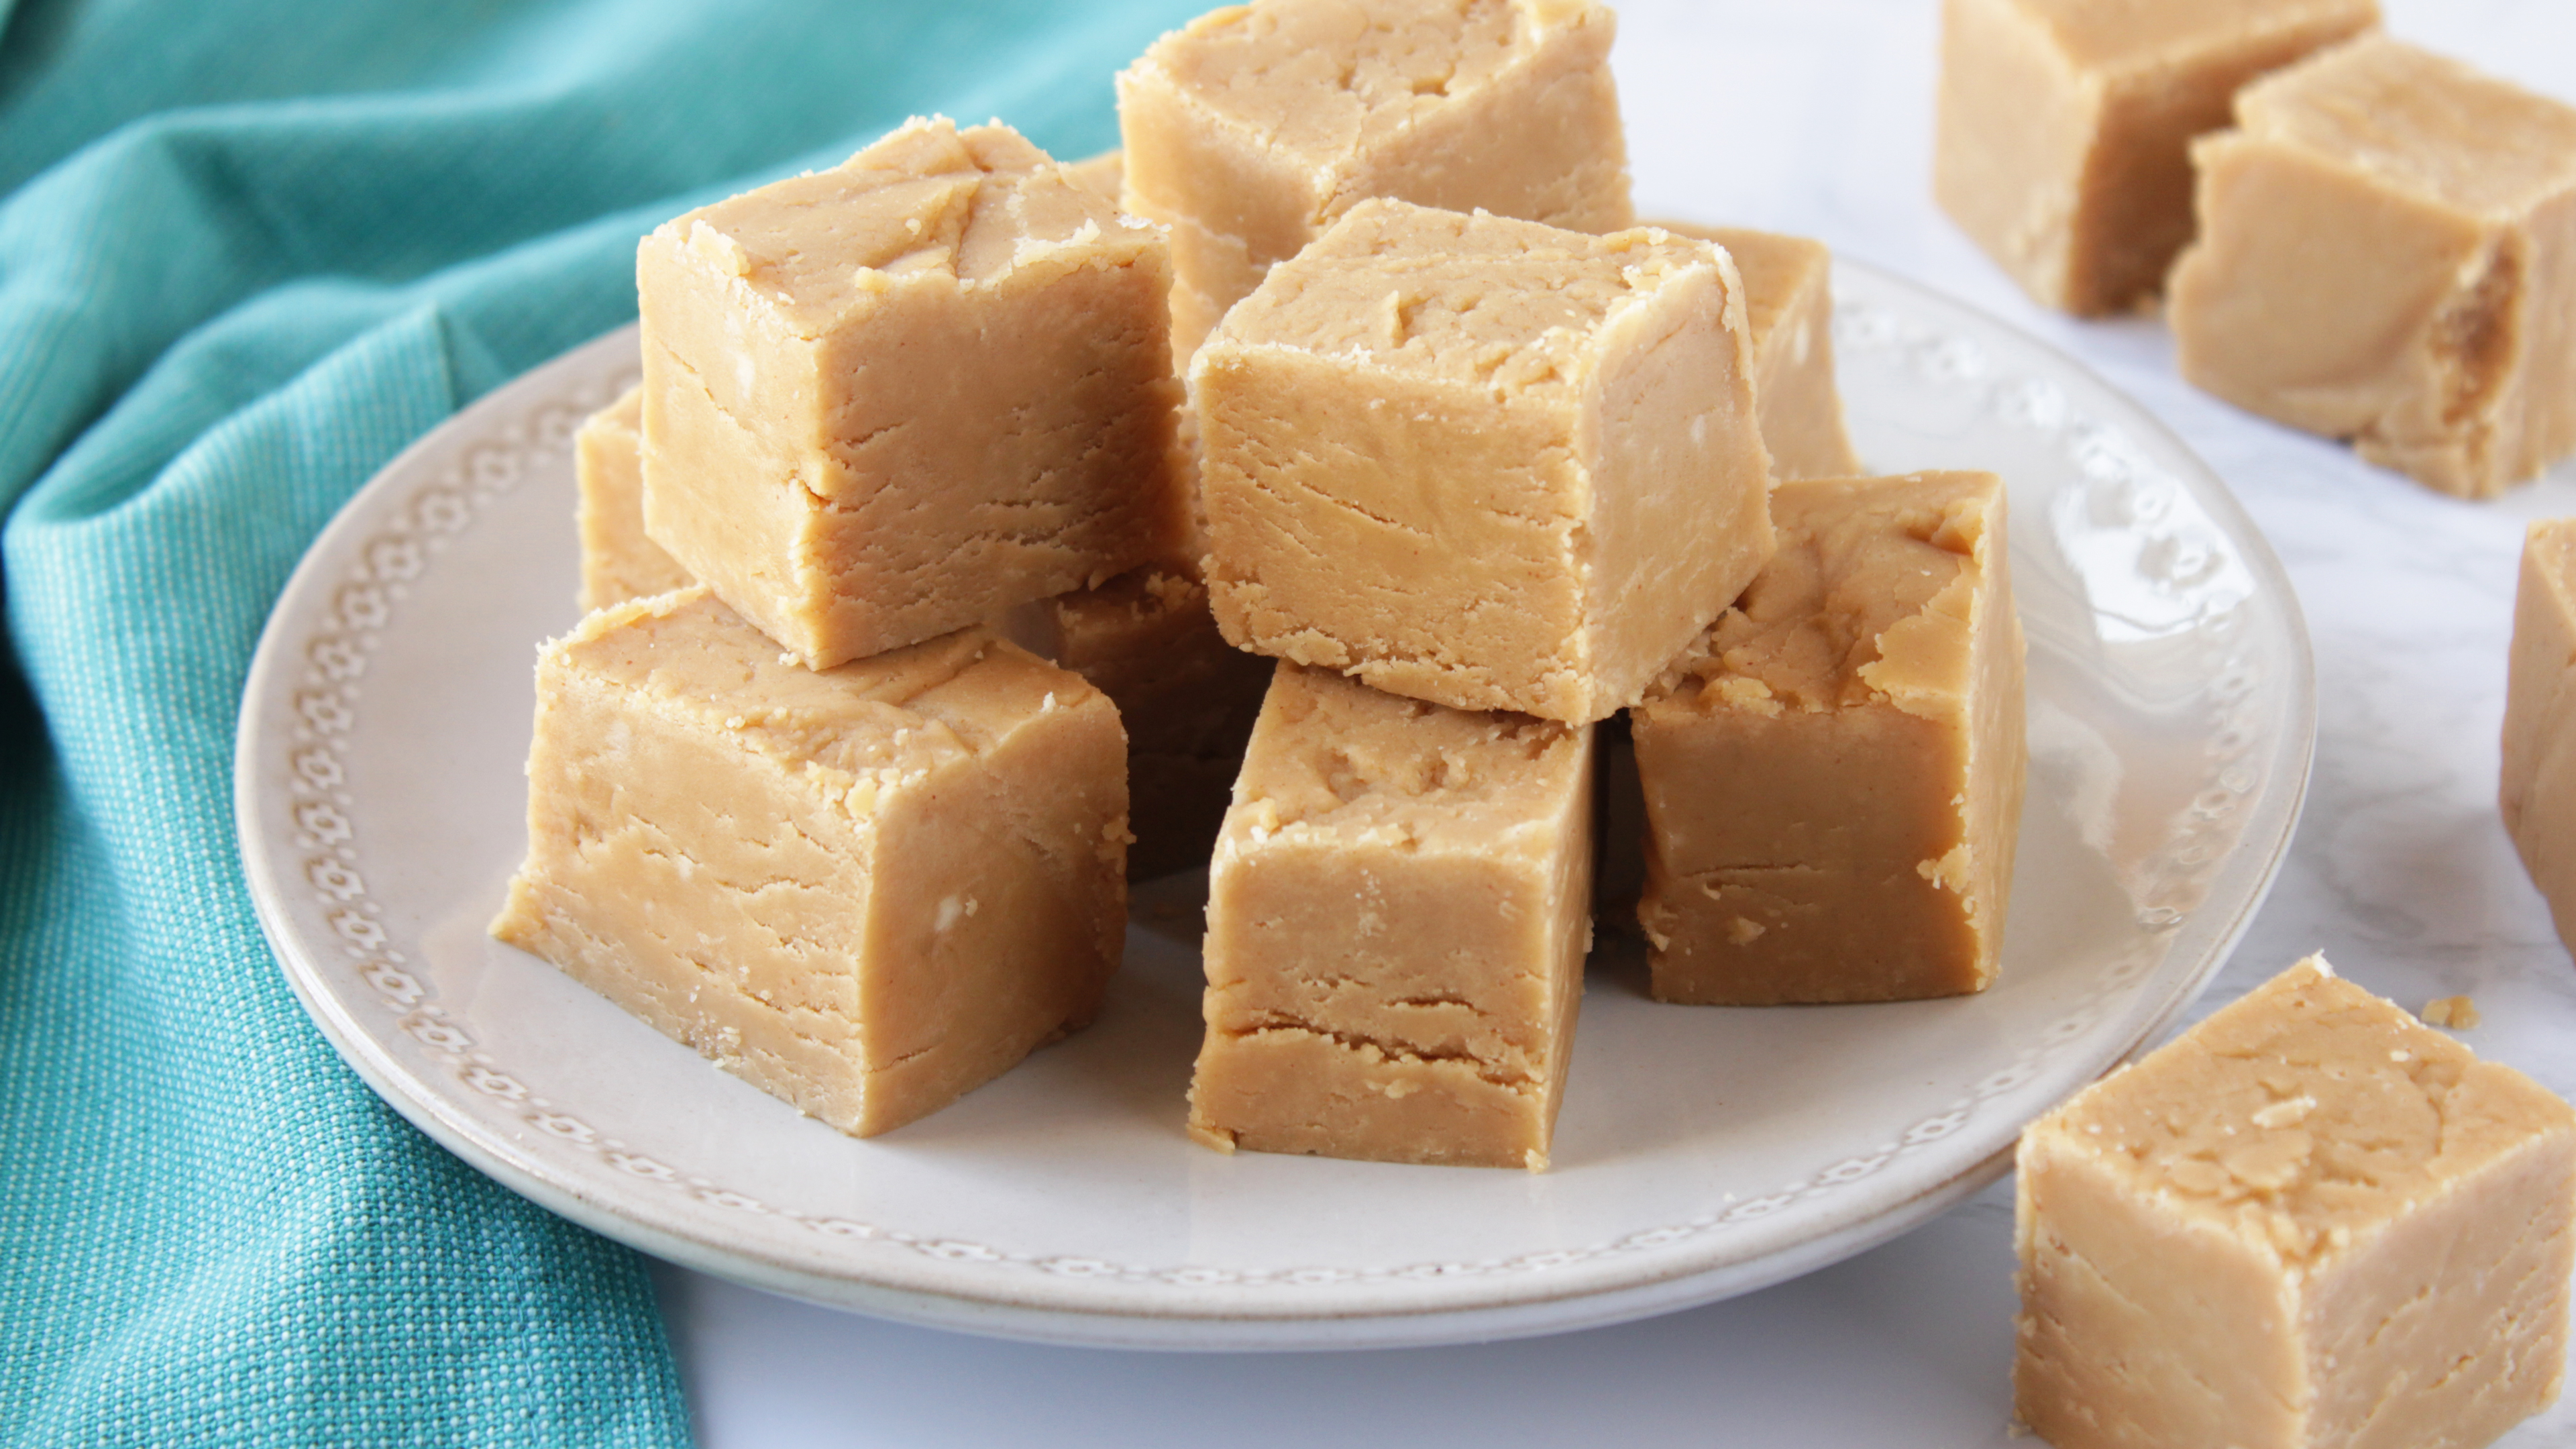 How To Make Peanut Butter Fudge Using an Electric Skillet